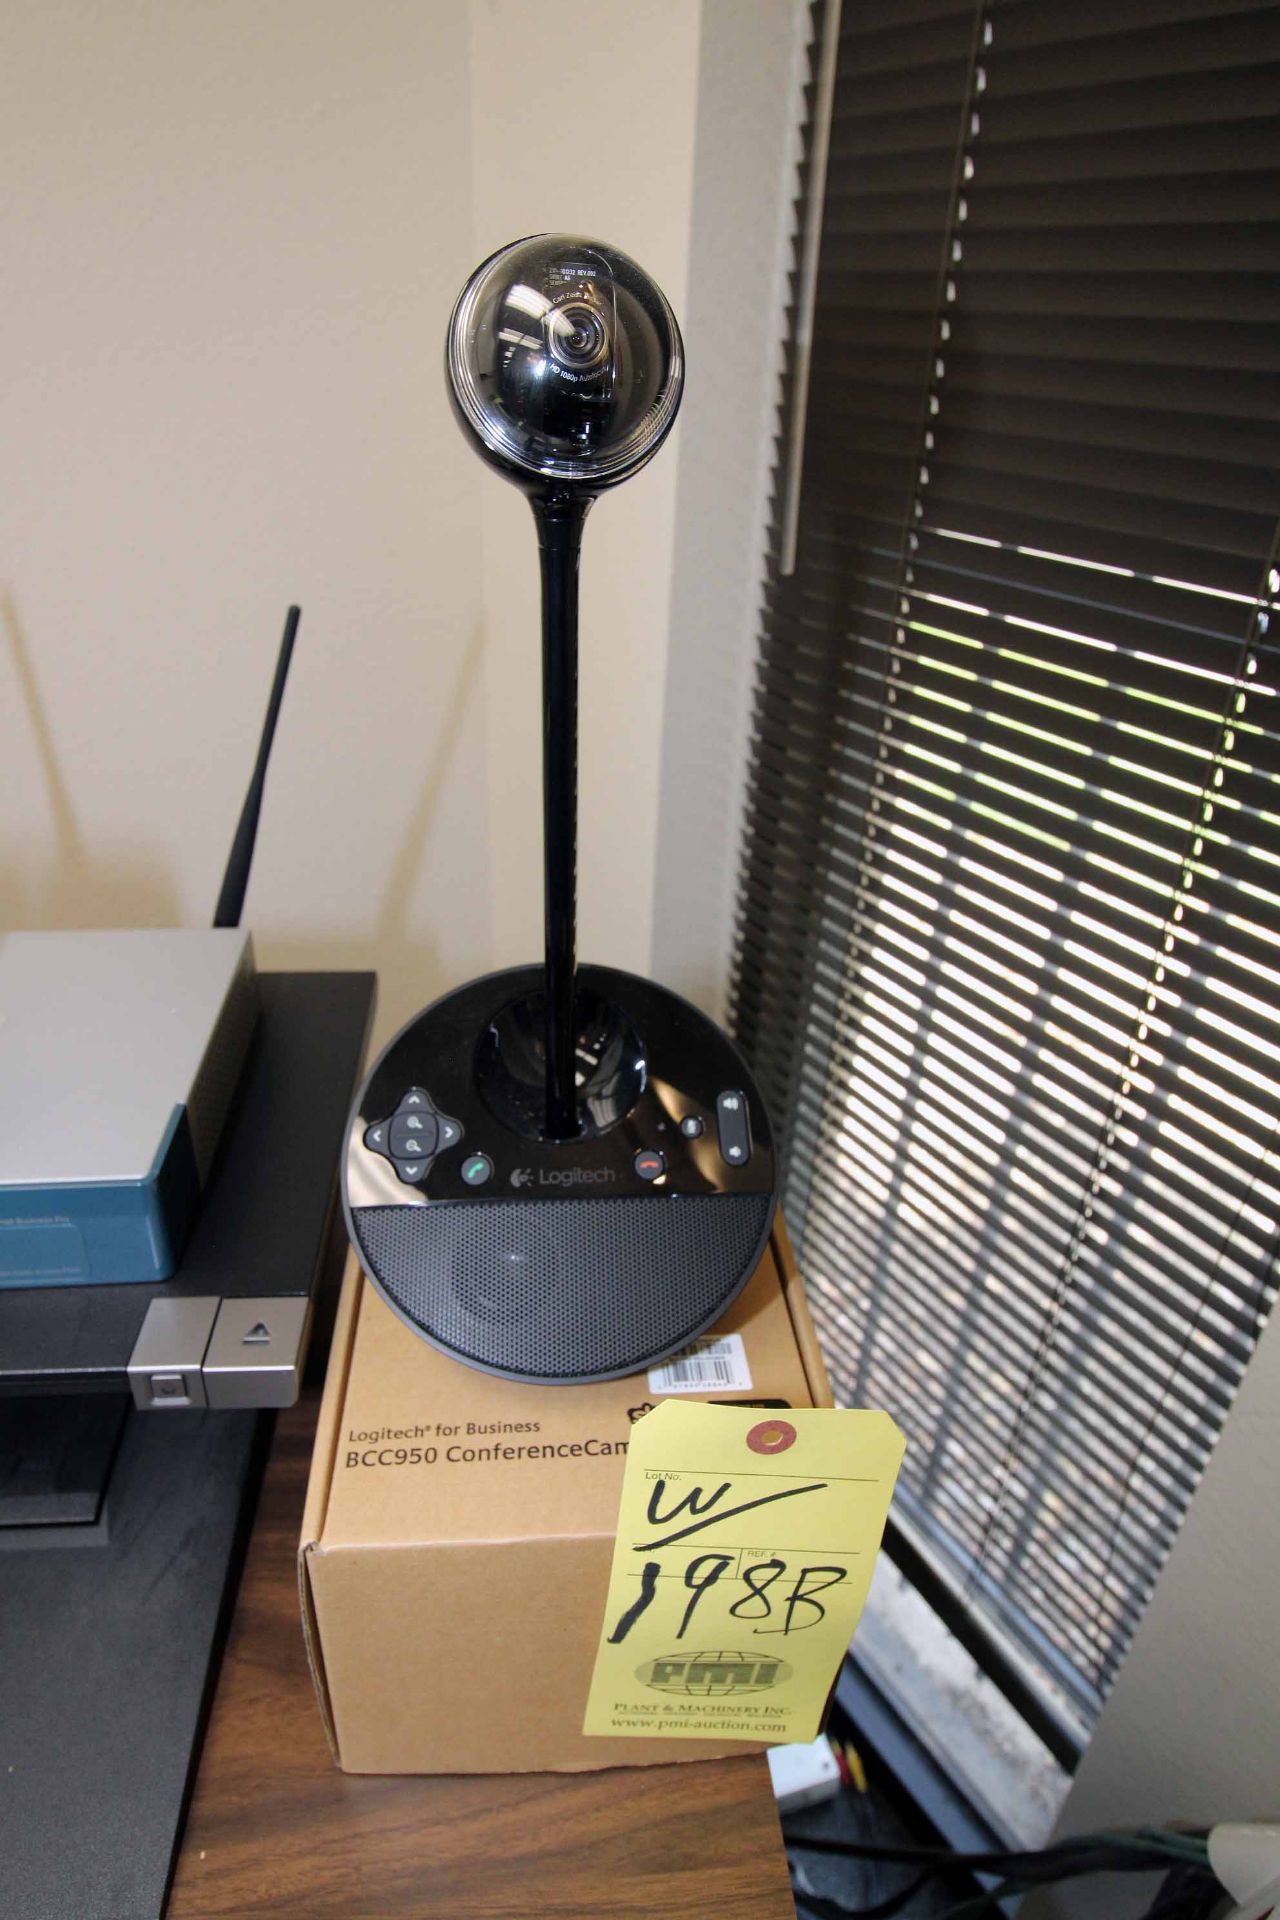 LOT OF CONFERENCE ITEMS: Notevision 5 projector, Dell docking station, Cisco router, Logitech Mdl. - Image 4 of 5